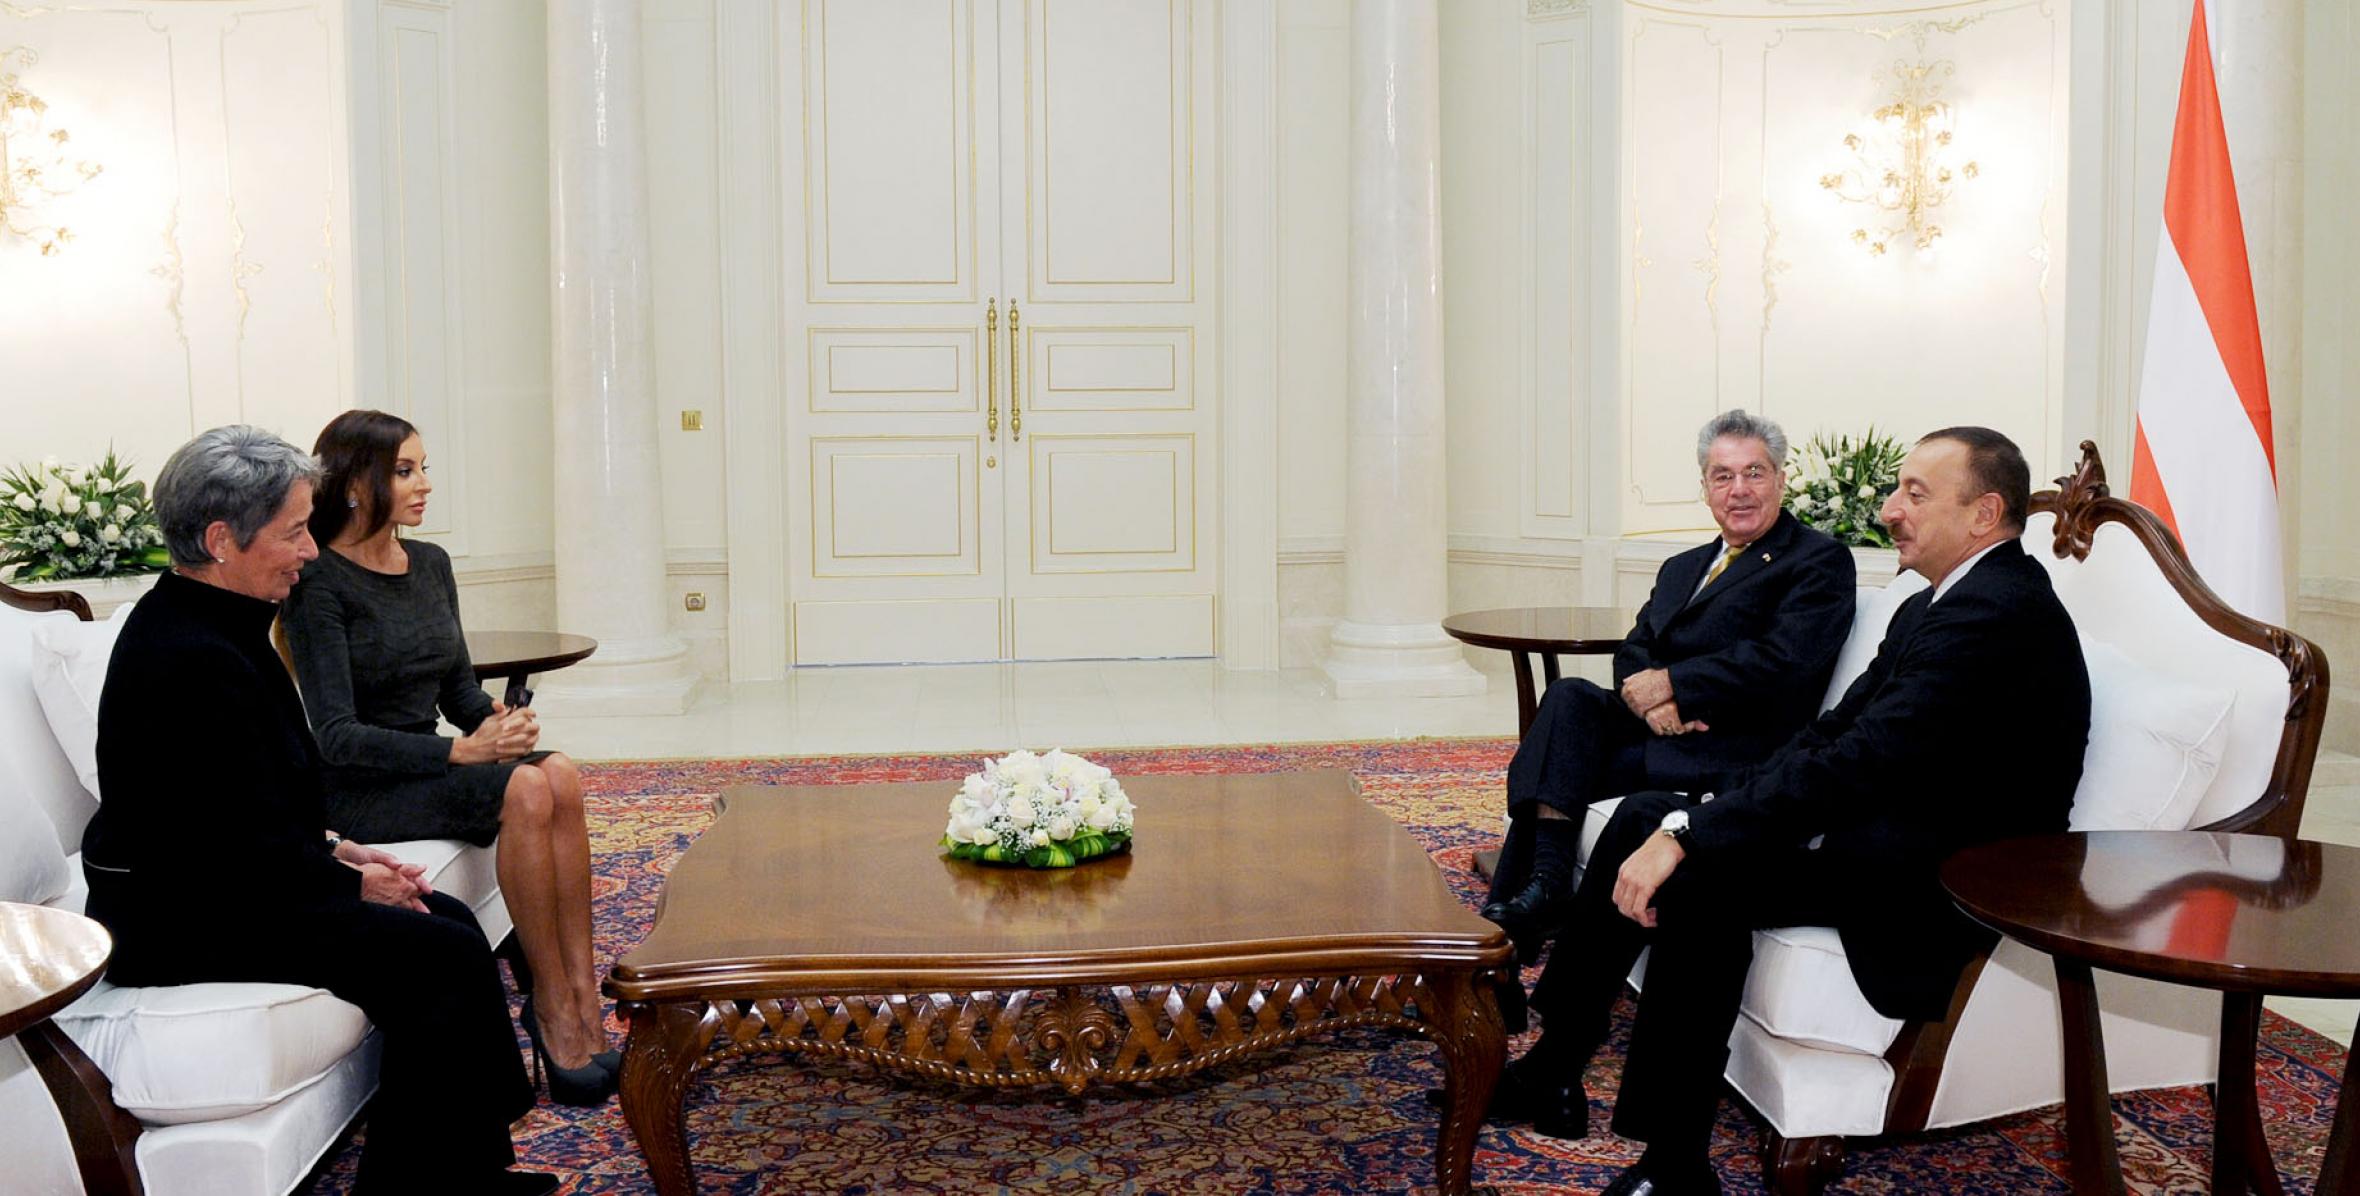 Ilham Aliyev and Federal President of the Republic of Austria Heinz Fischer held a face-to-face meeting